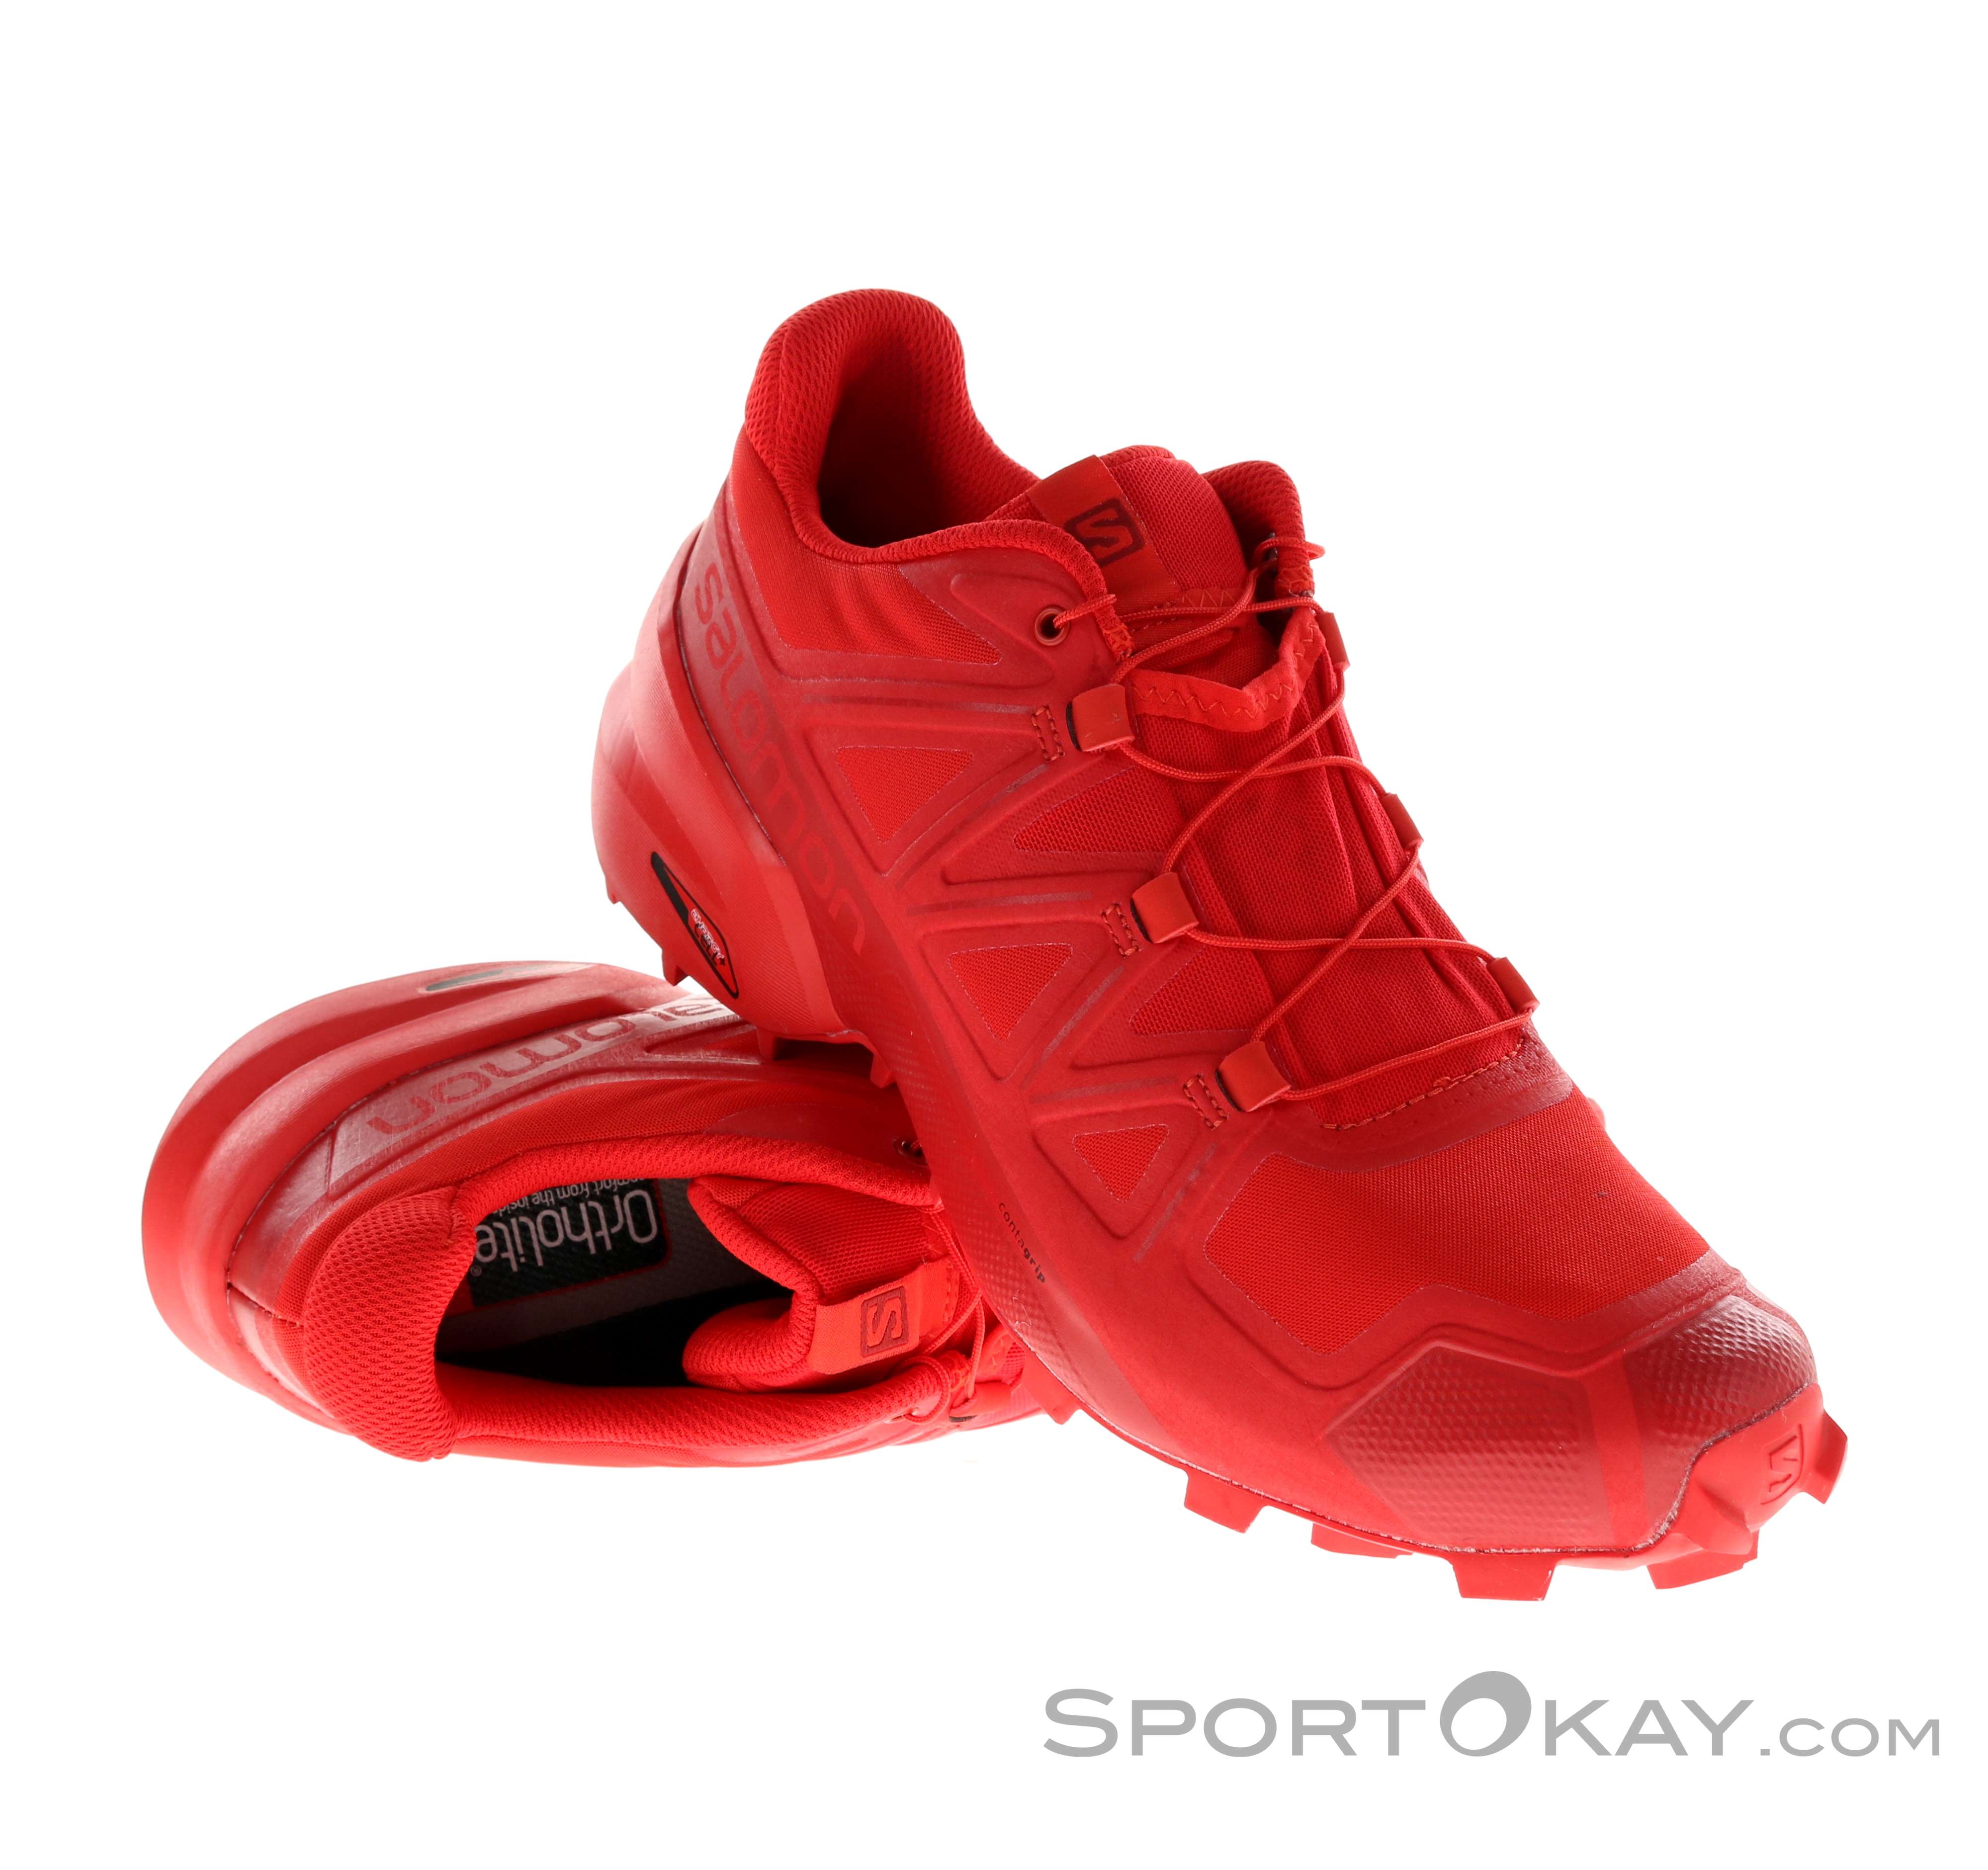 red trainers - OFF-58% >Free Delivery